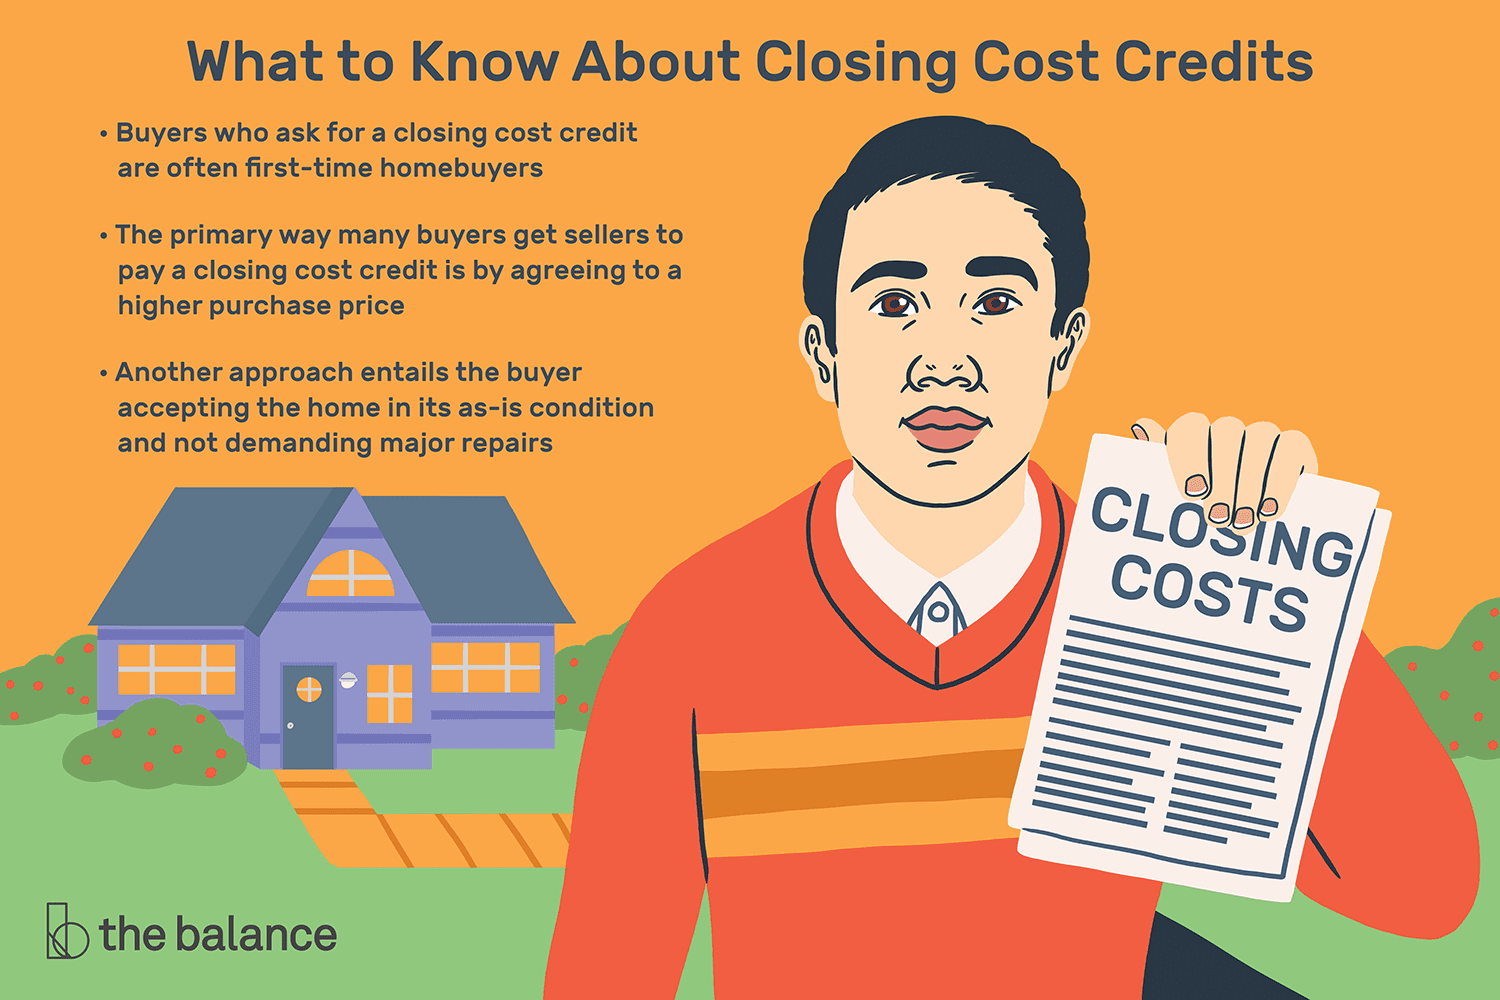 home-sellers-paying-closing-cost-credits-4134262_FINAL-b881d78ab2234285b358324624cc0e16.png